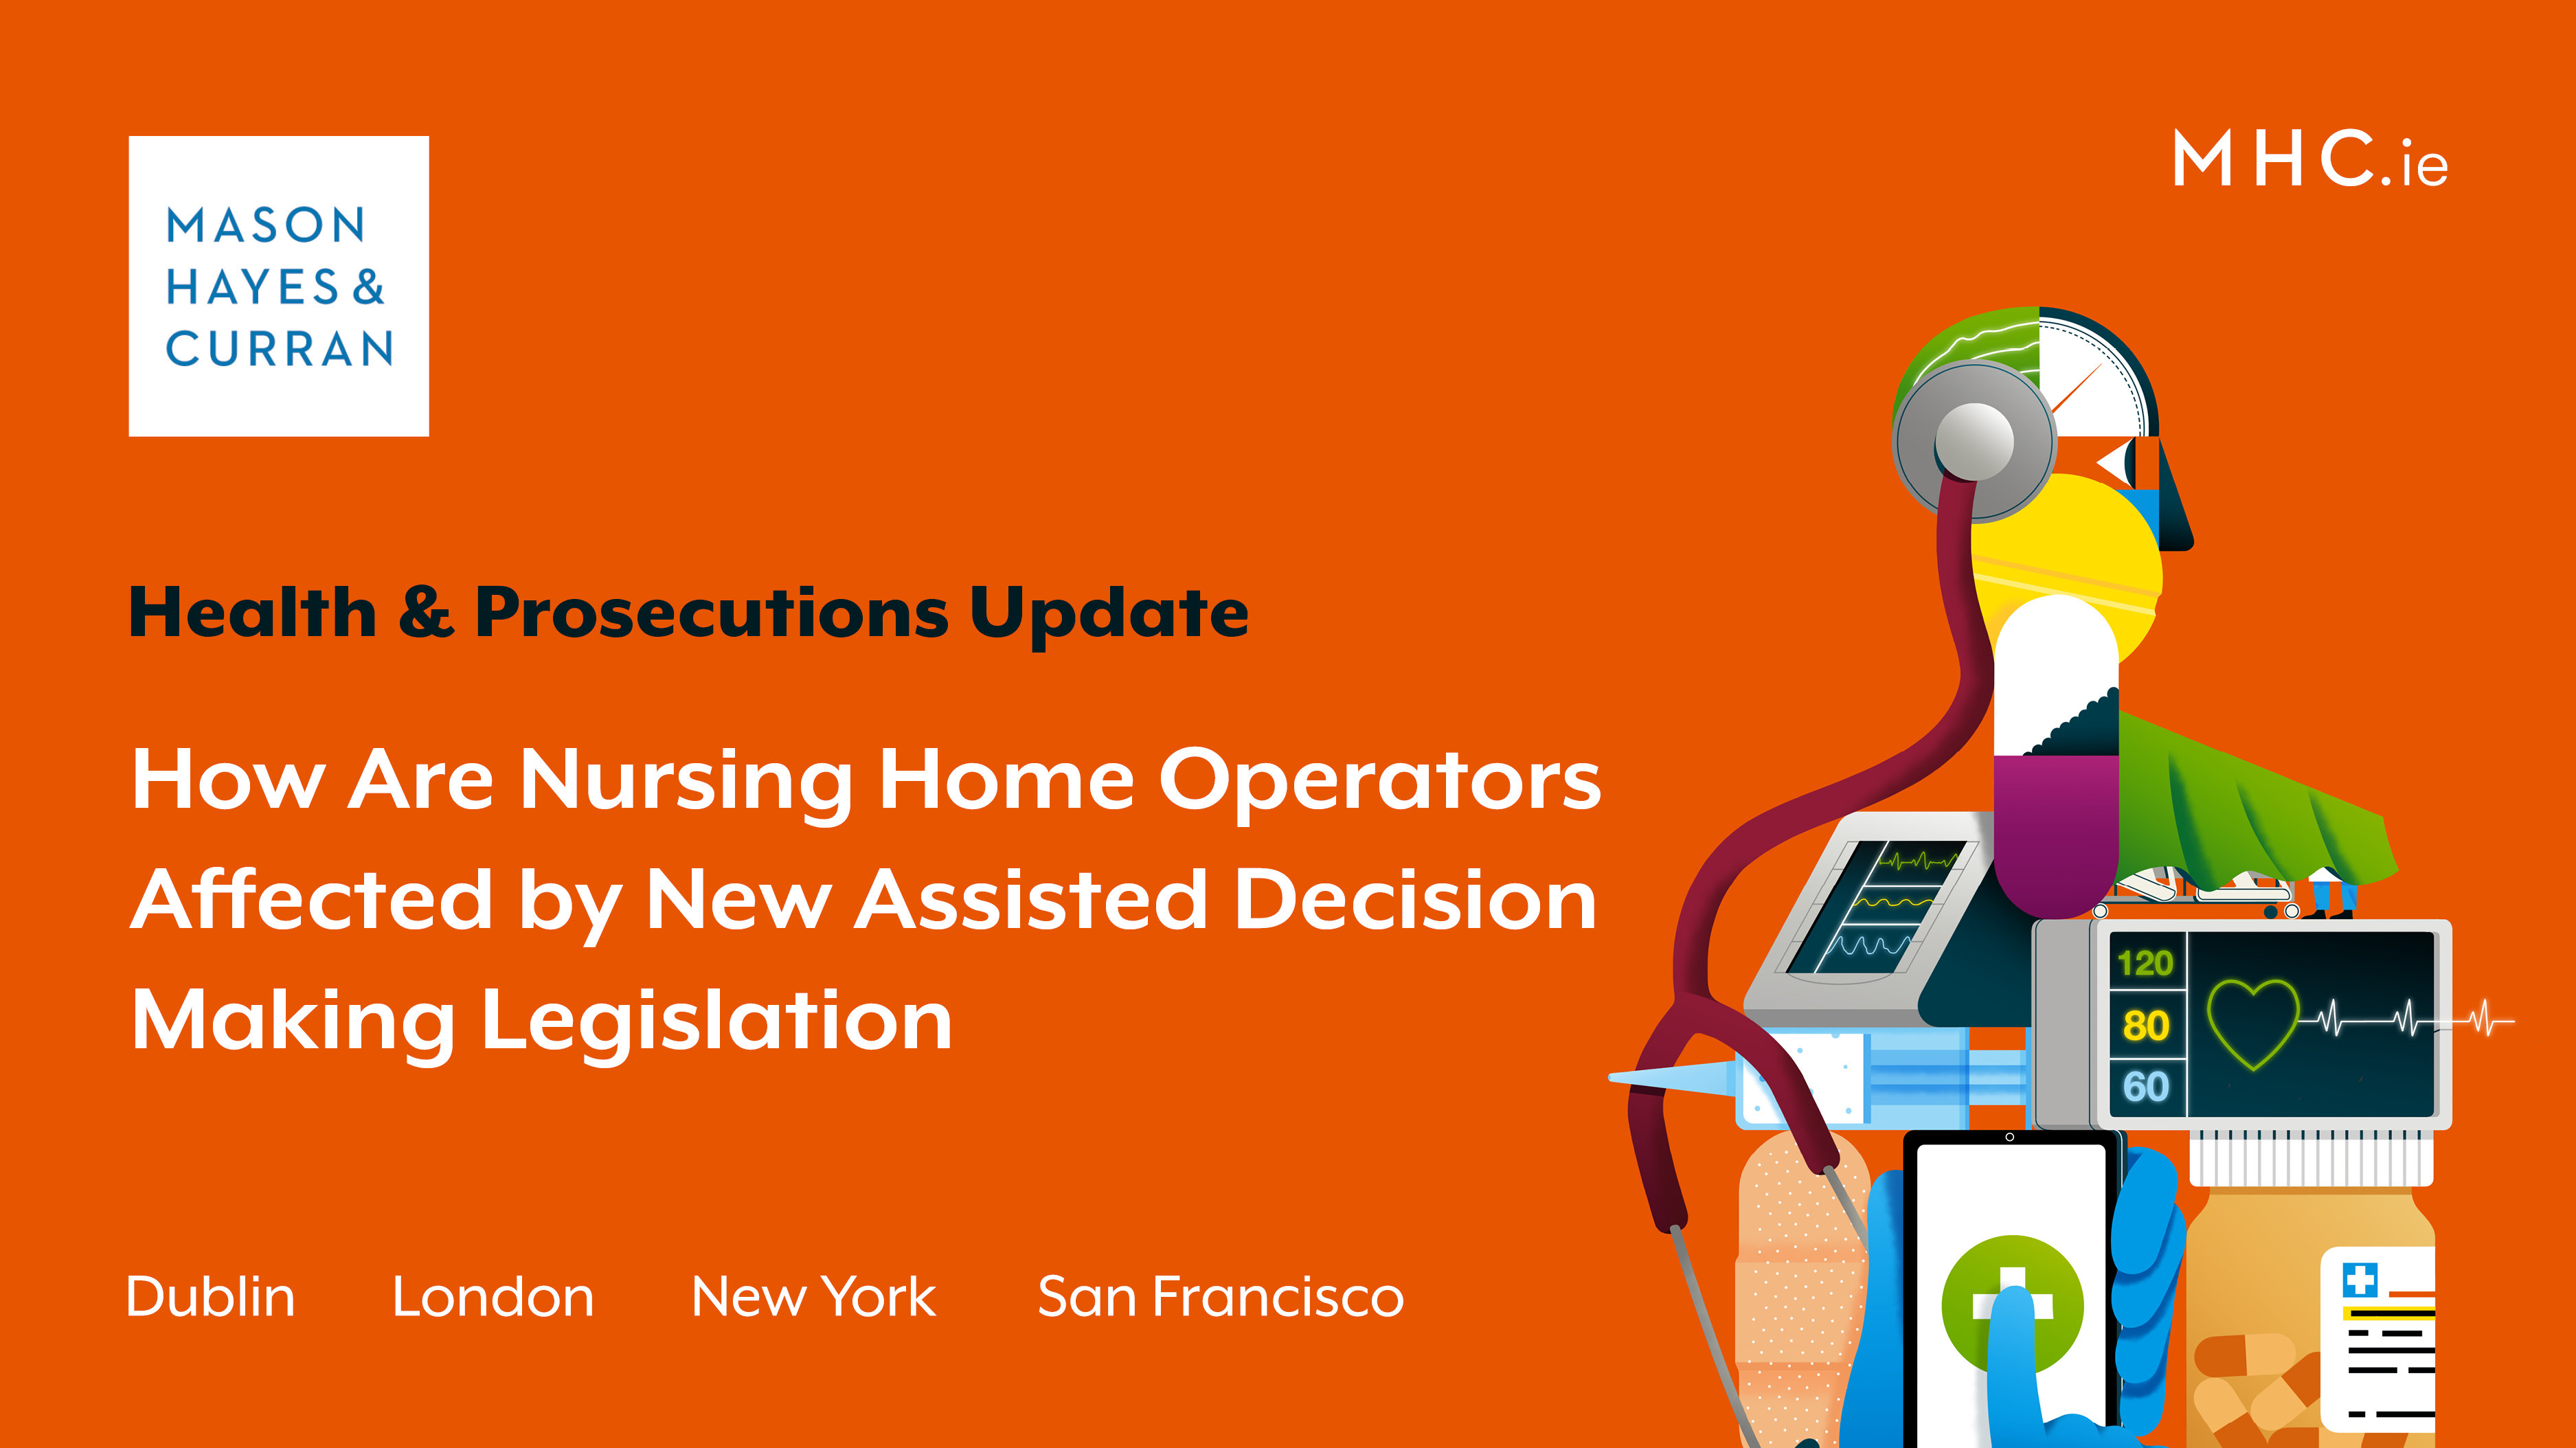 How Are Nursing Home Operators Affected by New Assisted Decision Making Legislation